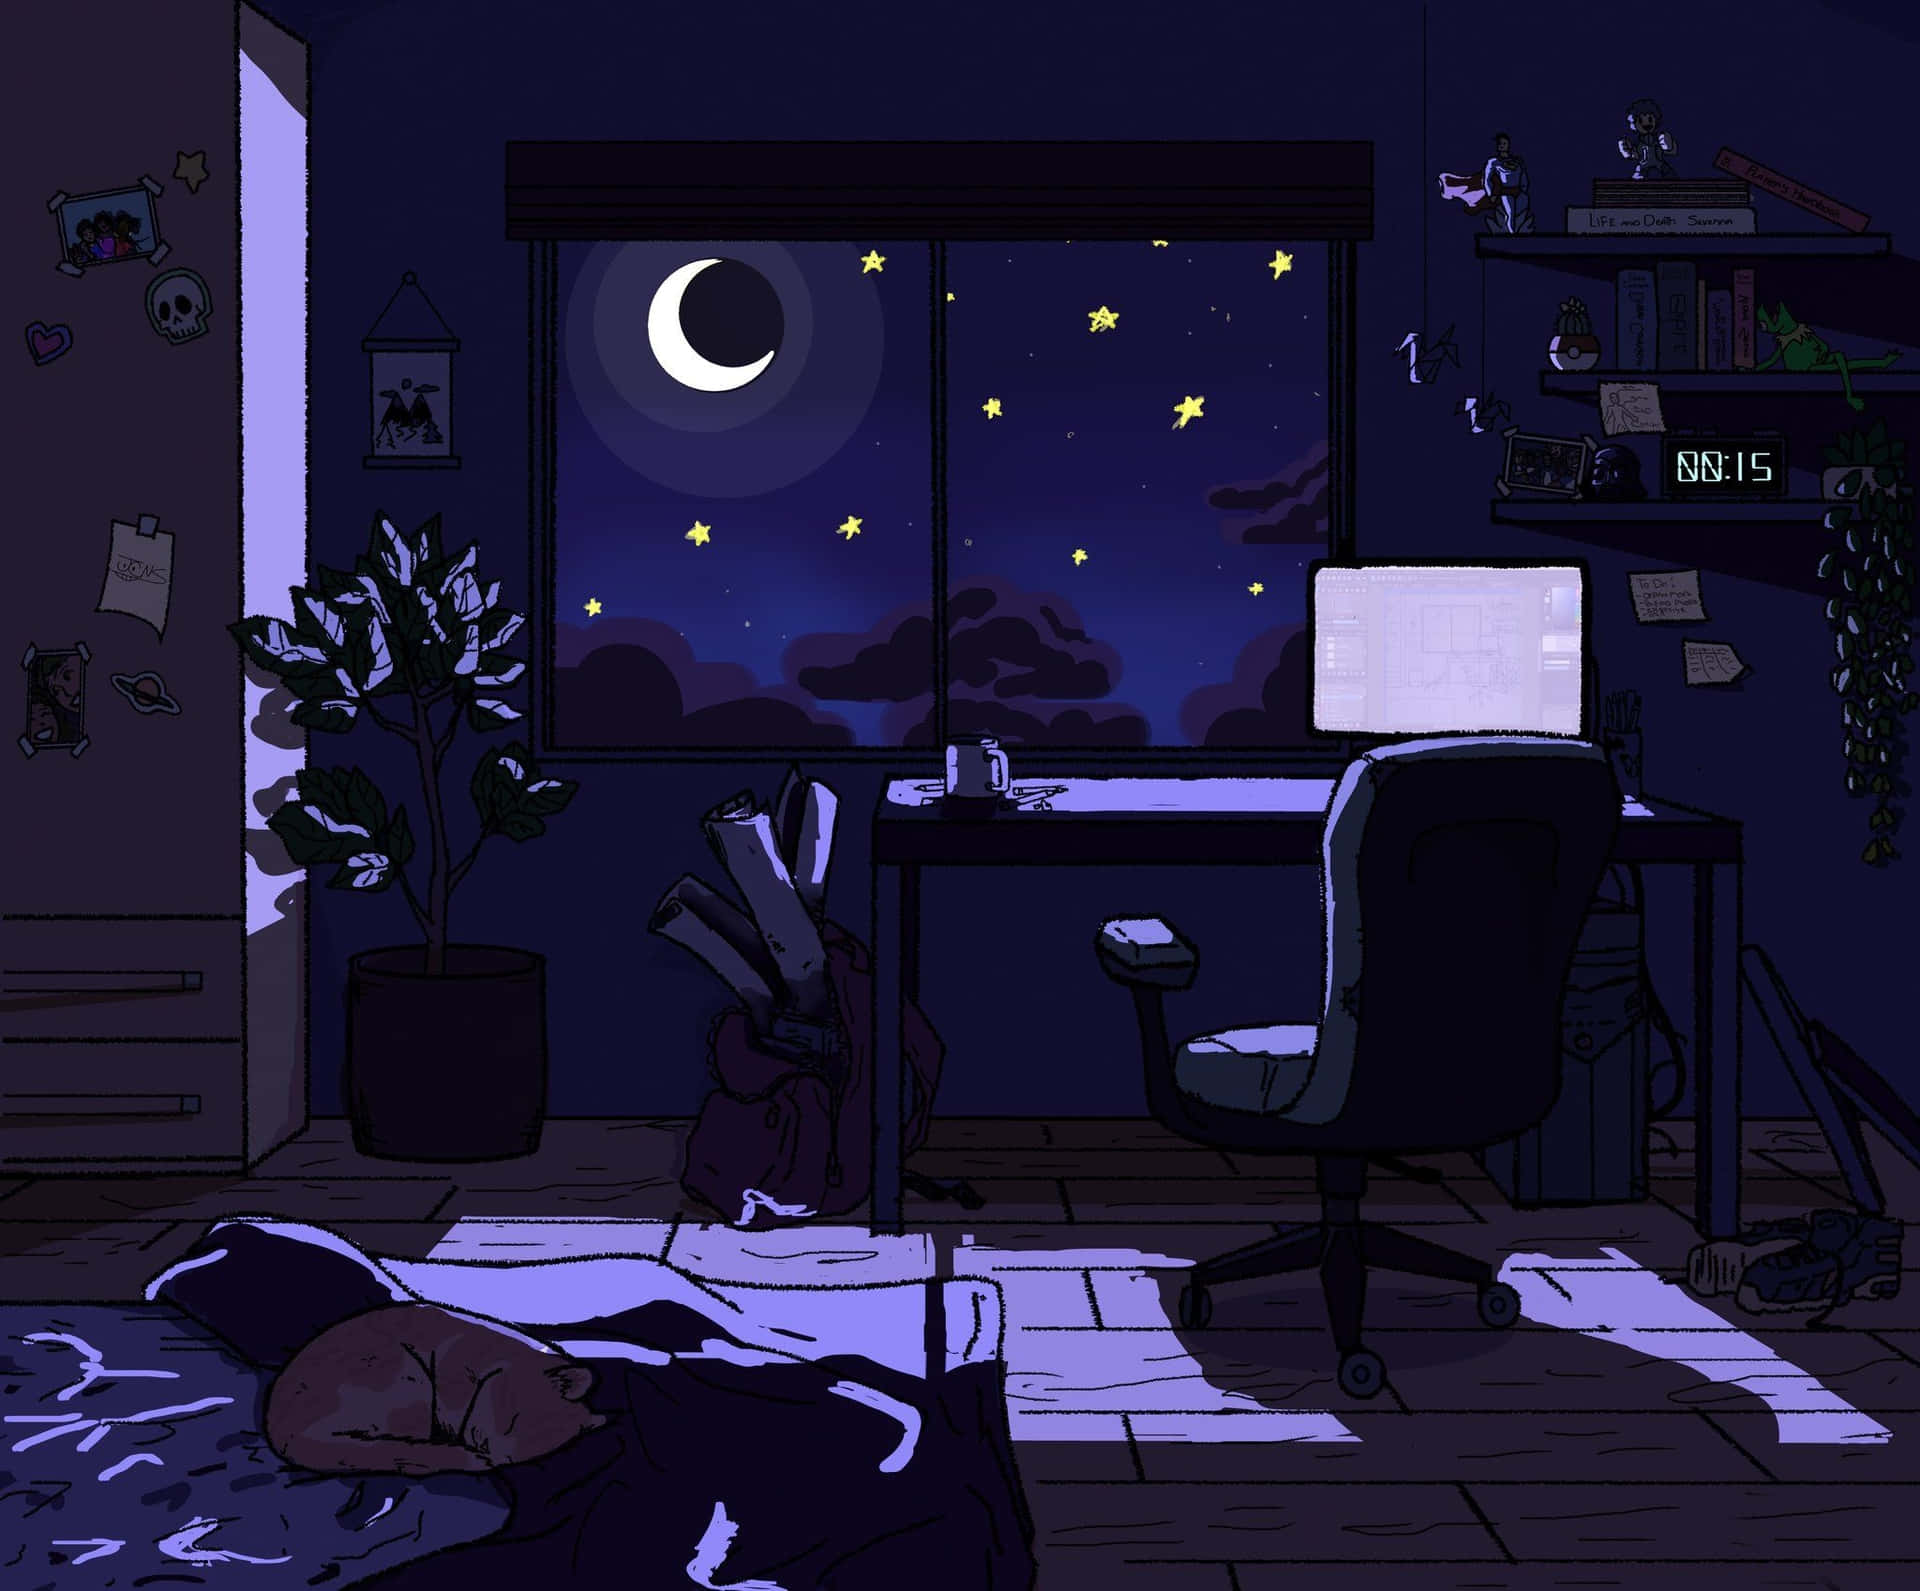 Spend a cozy evening at home watching anime! Wallpaper